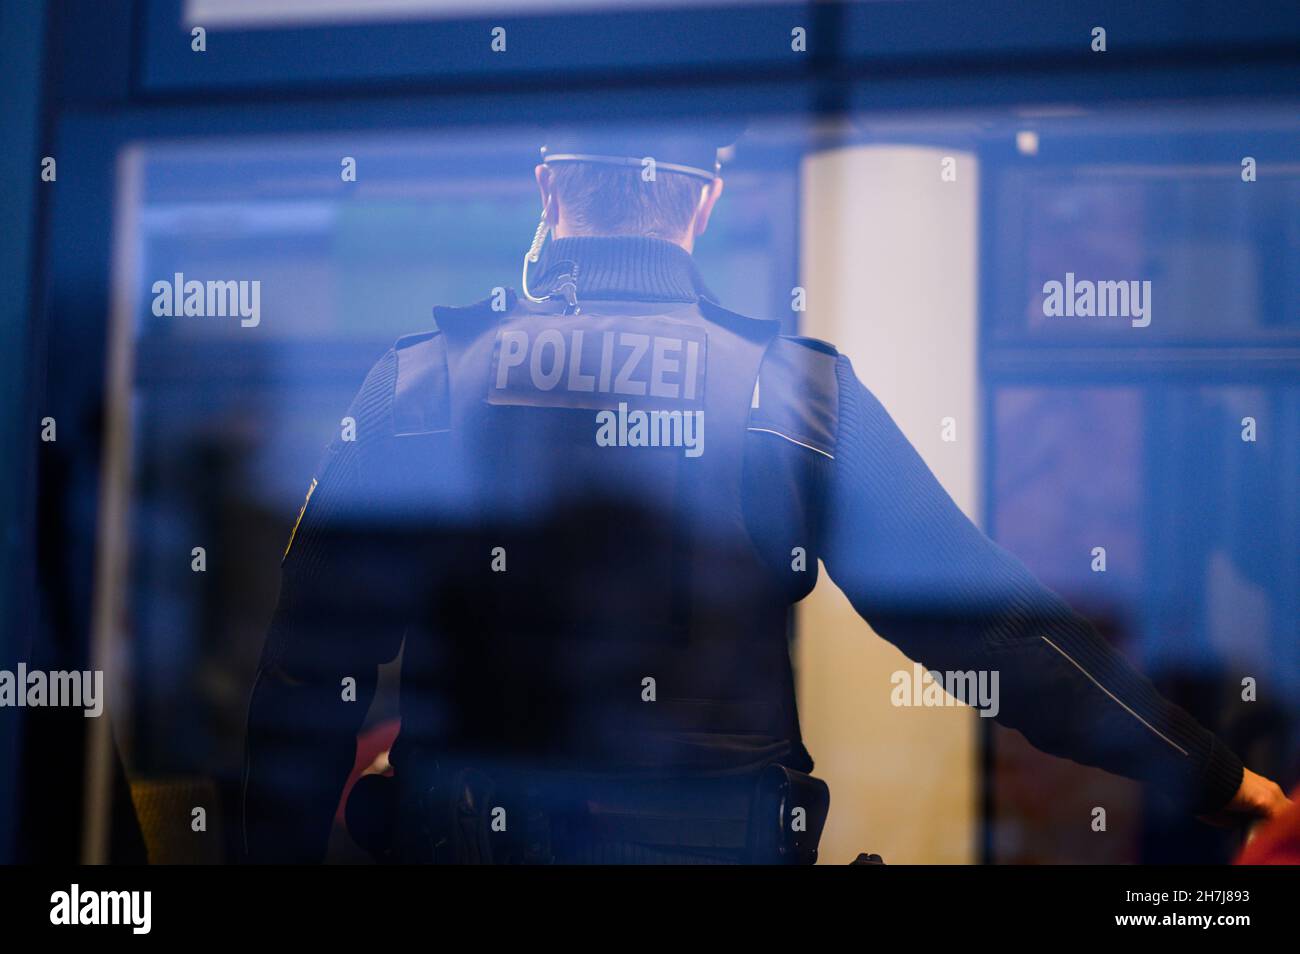 Dresden, Germany. 23rd Nov, 2021. A policeman stands in a DVB tram in Dresden city centre. The Dresden police department is monitoring compliance with the new Corona rules on a daily basis with 50 officers. Accordingly, the focus is on controls of the FFP2 mask obligation in public transport as well as the exit restrictions for unvaccinated persons in hotspot areas. Credit: Robert Michael/dpa-Zentralbild/dpa/Alamy Live News Stock Photo